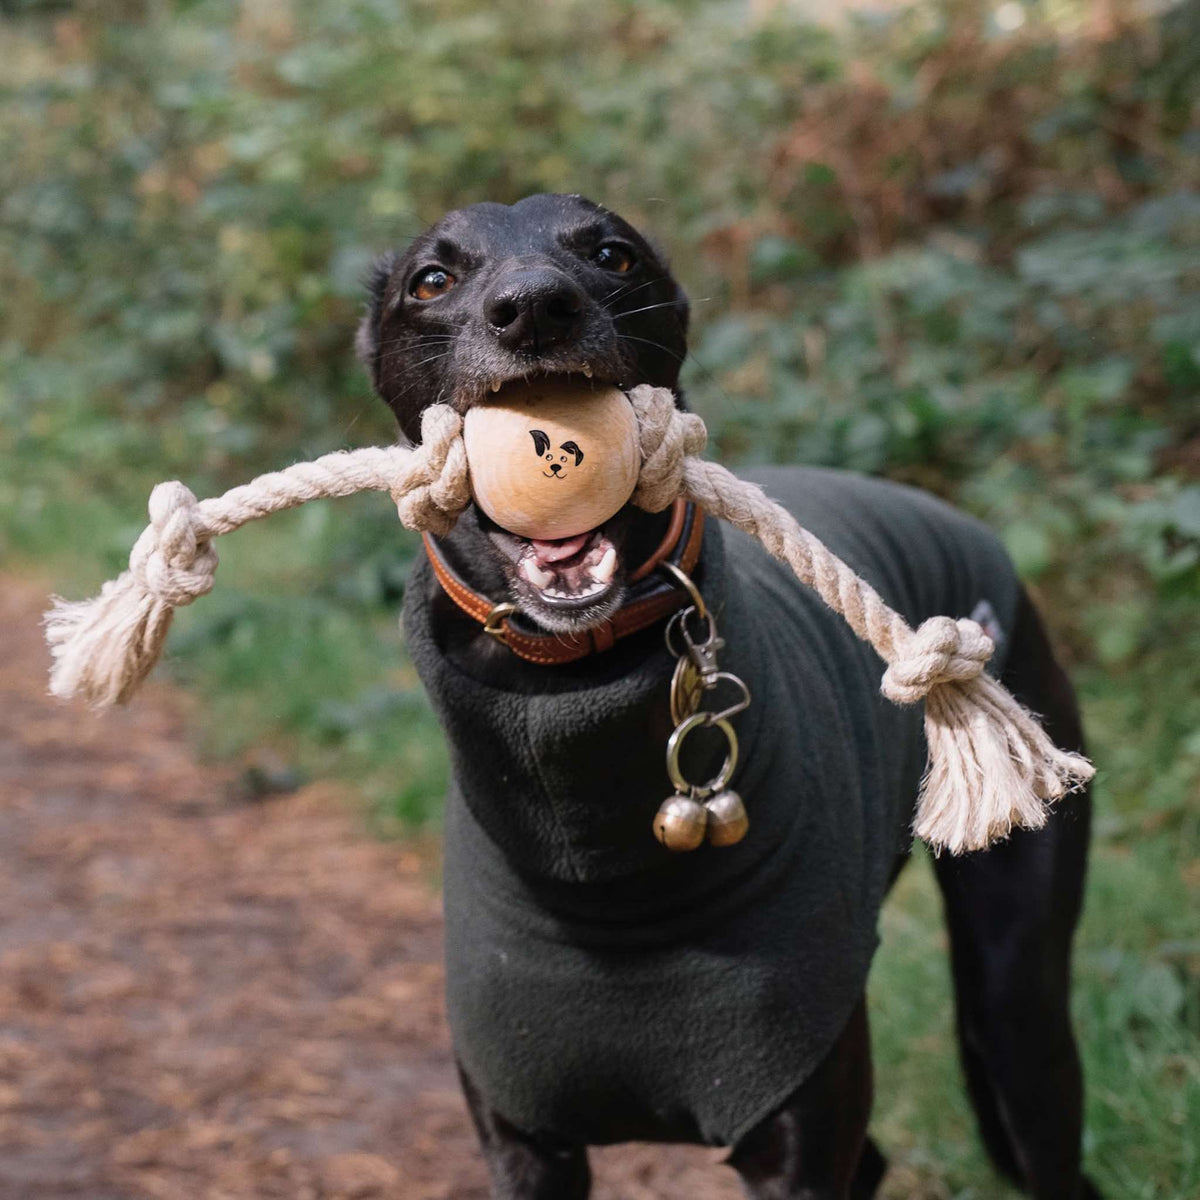 Black Dog Holding a Knotty-ness - Smug Mutts Natural Hemp Rope and Beech Wood Dog Toy, Two Knots Fixing the Ball in Place with Two Further Knots and Rope Lengths, Natural and Eco Friendly Dog Toy